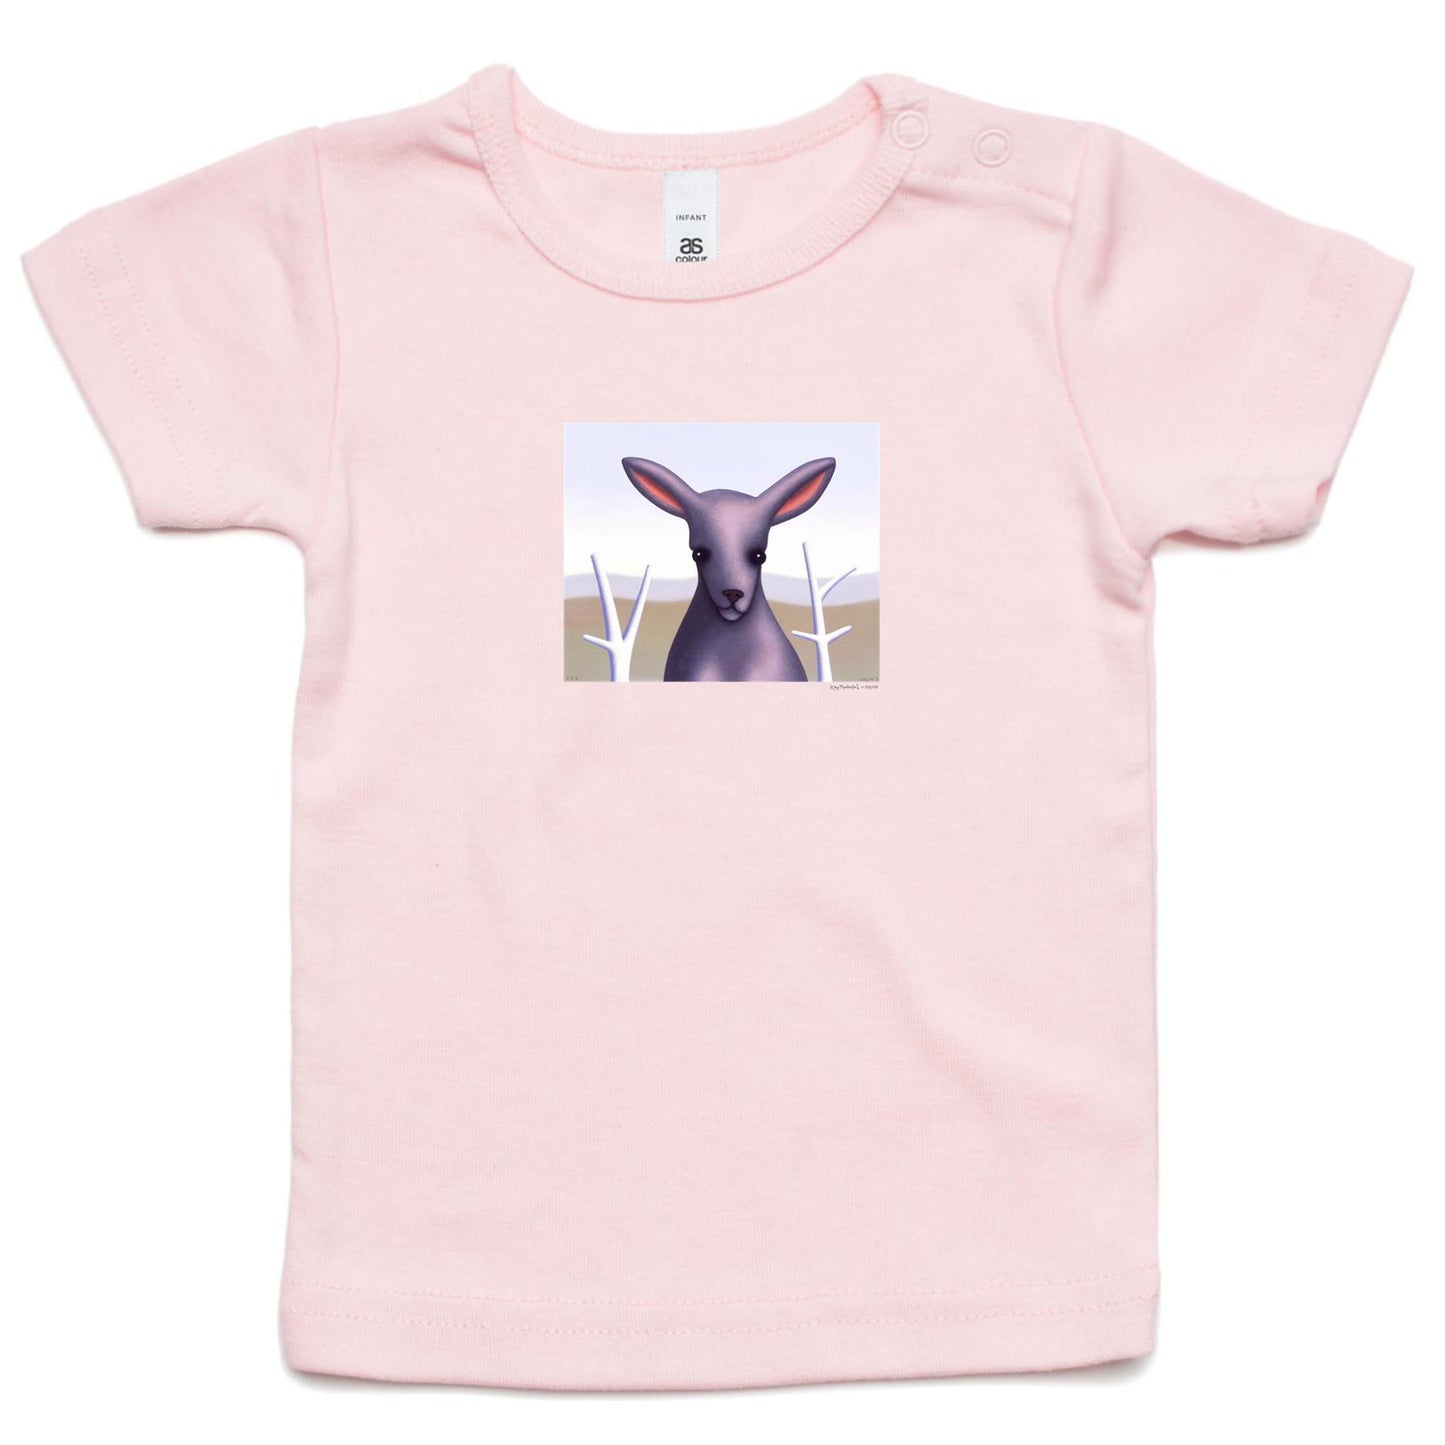 Fluffy the Slightly Pink Kangaroo T Shirts for Babies